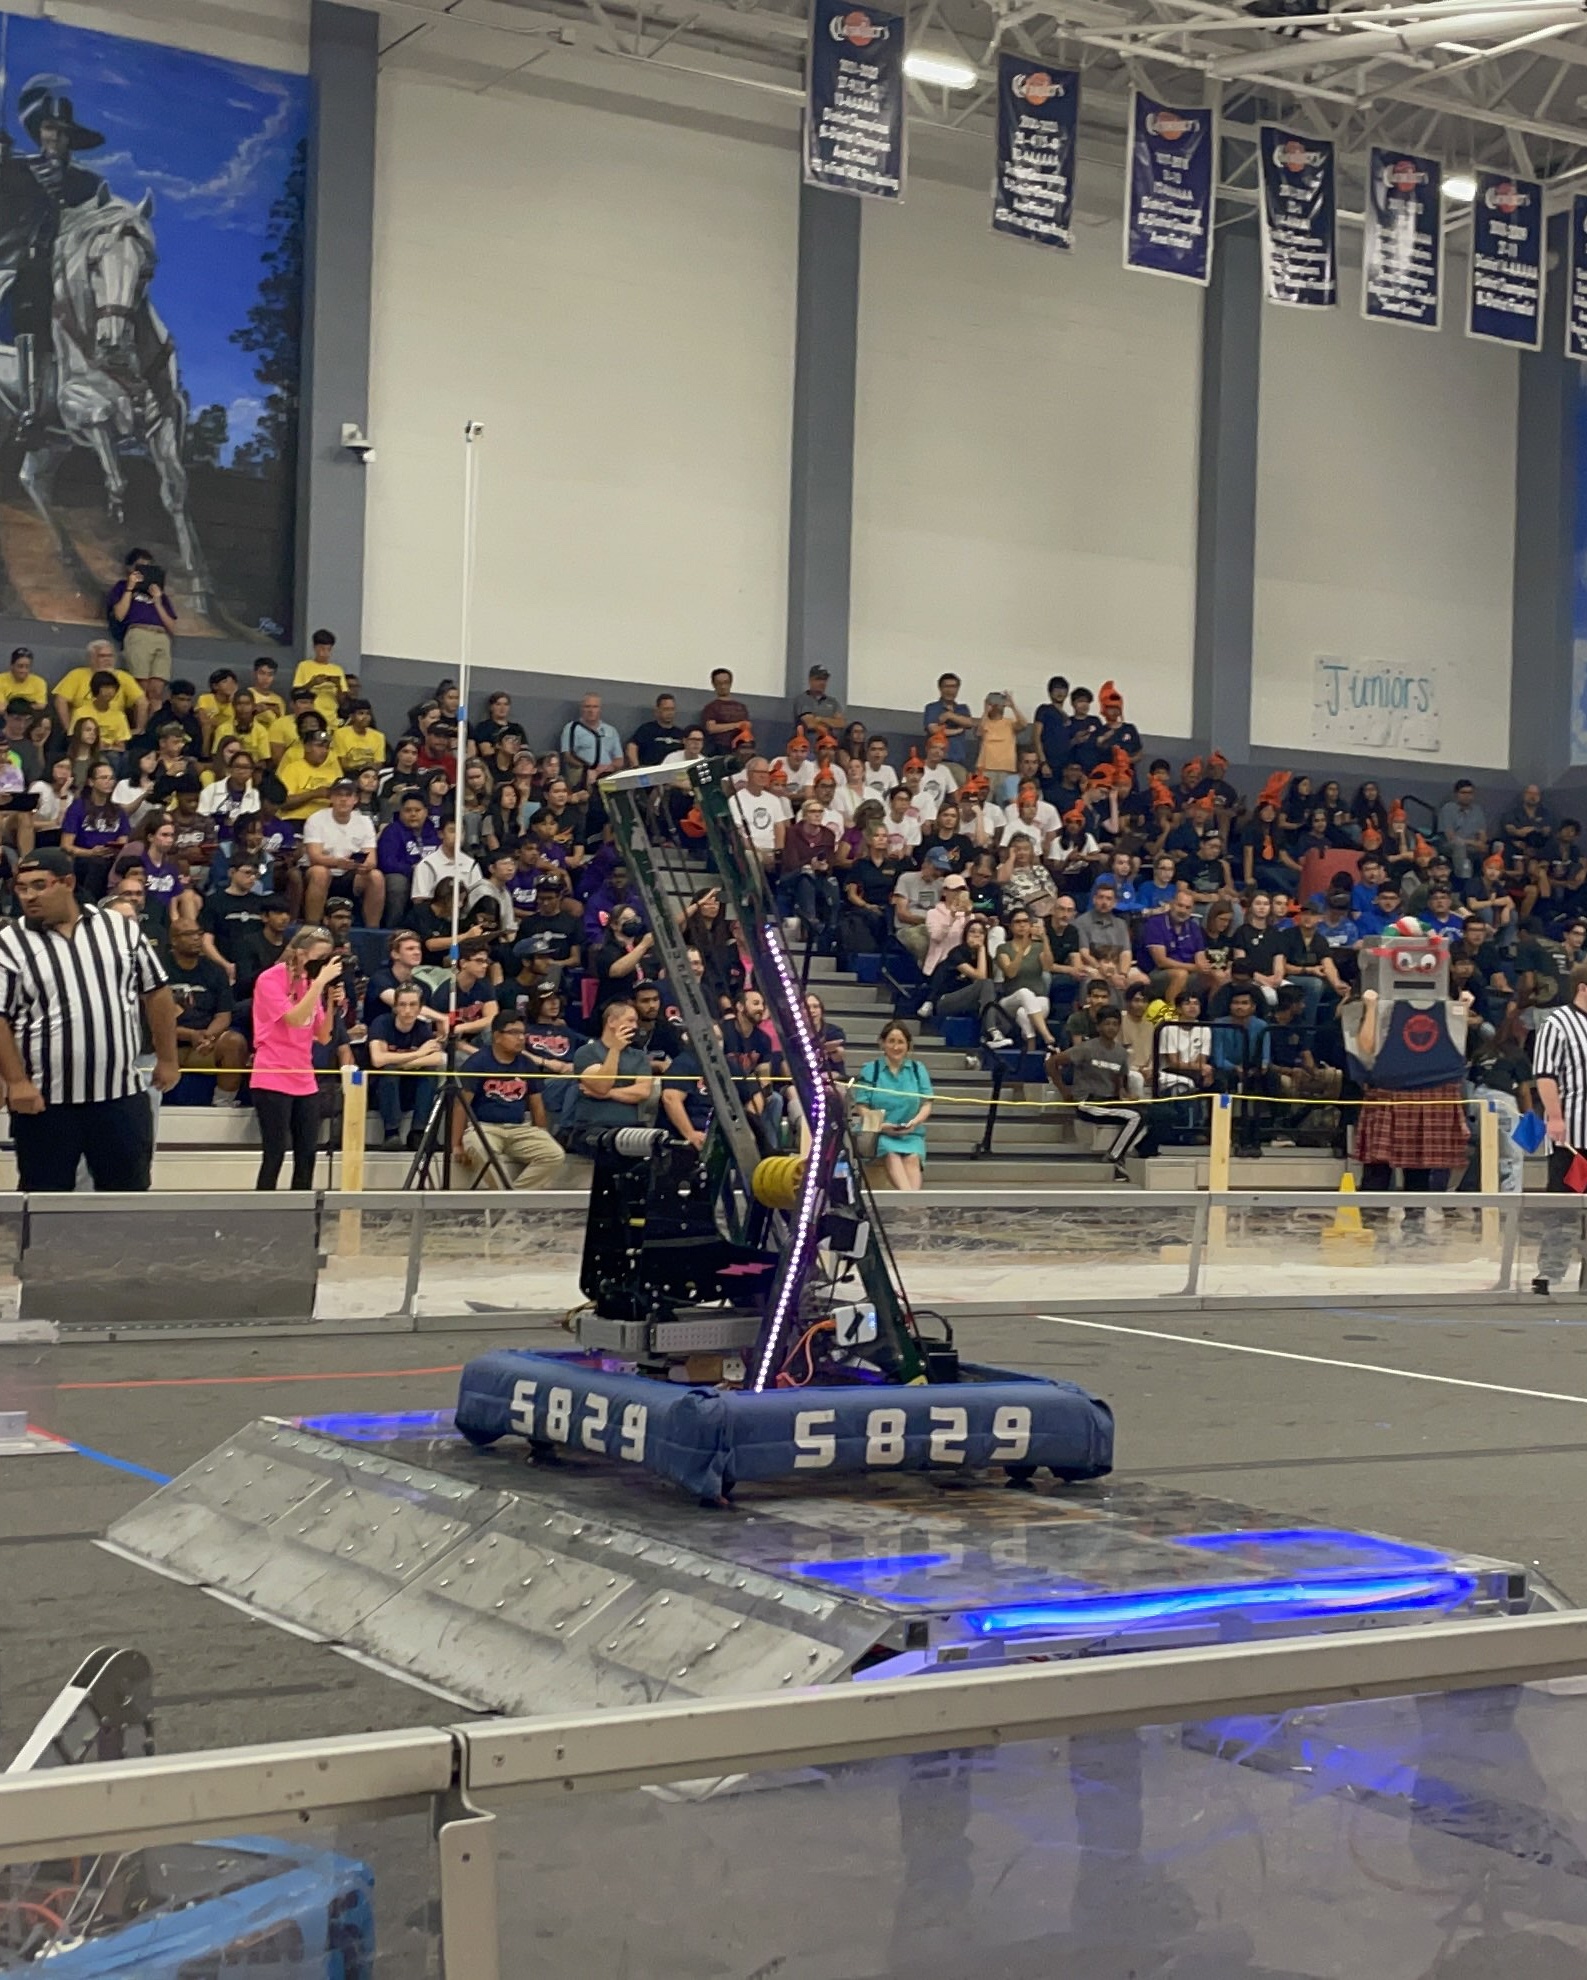 A photo of a 2023 FRC game. The Awtybots robot is on the charge station, balancing alone, while there is a crowd on the stands in the background. A large poster of a horseman and a horse is visible in the top left of the image. The photo is taken from one side of the field, looking up across the field.